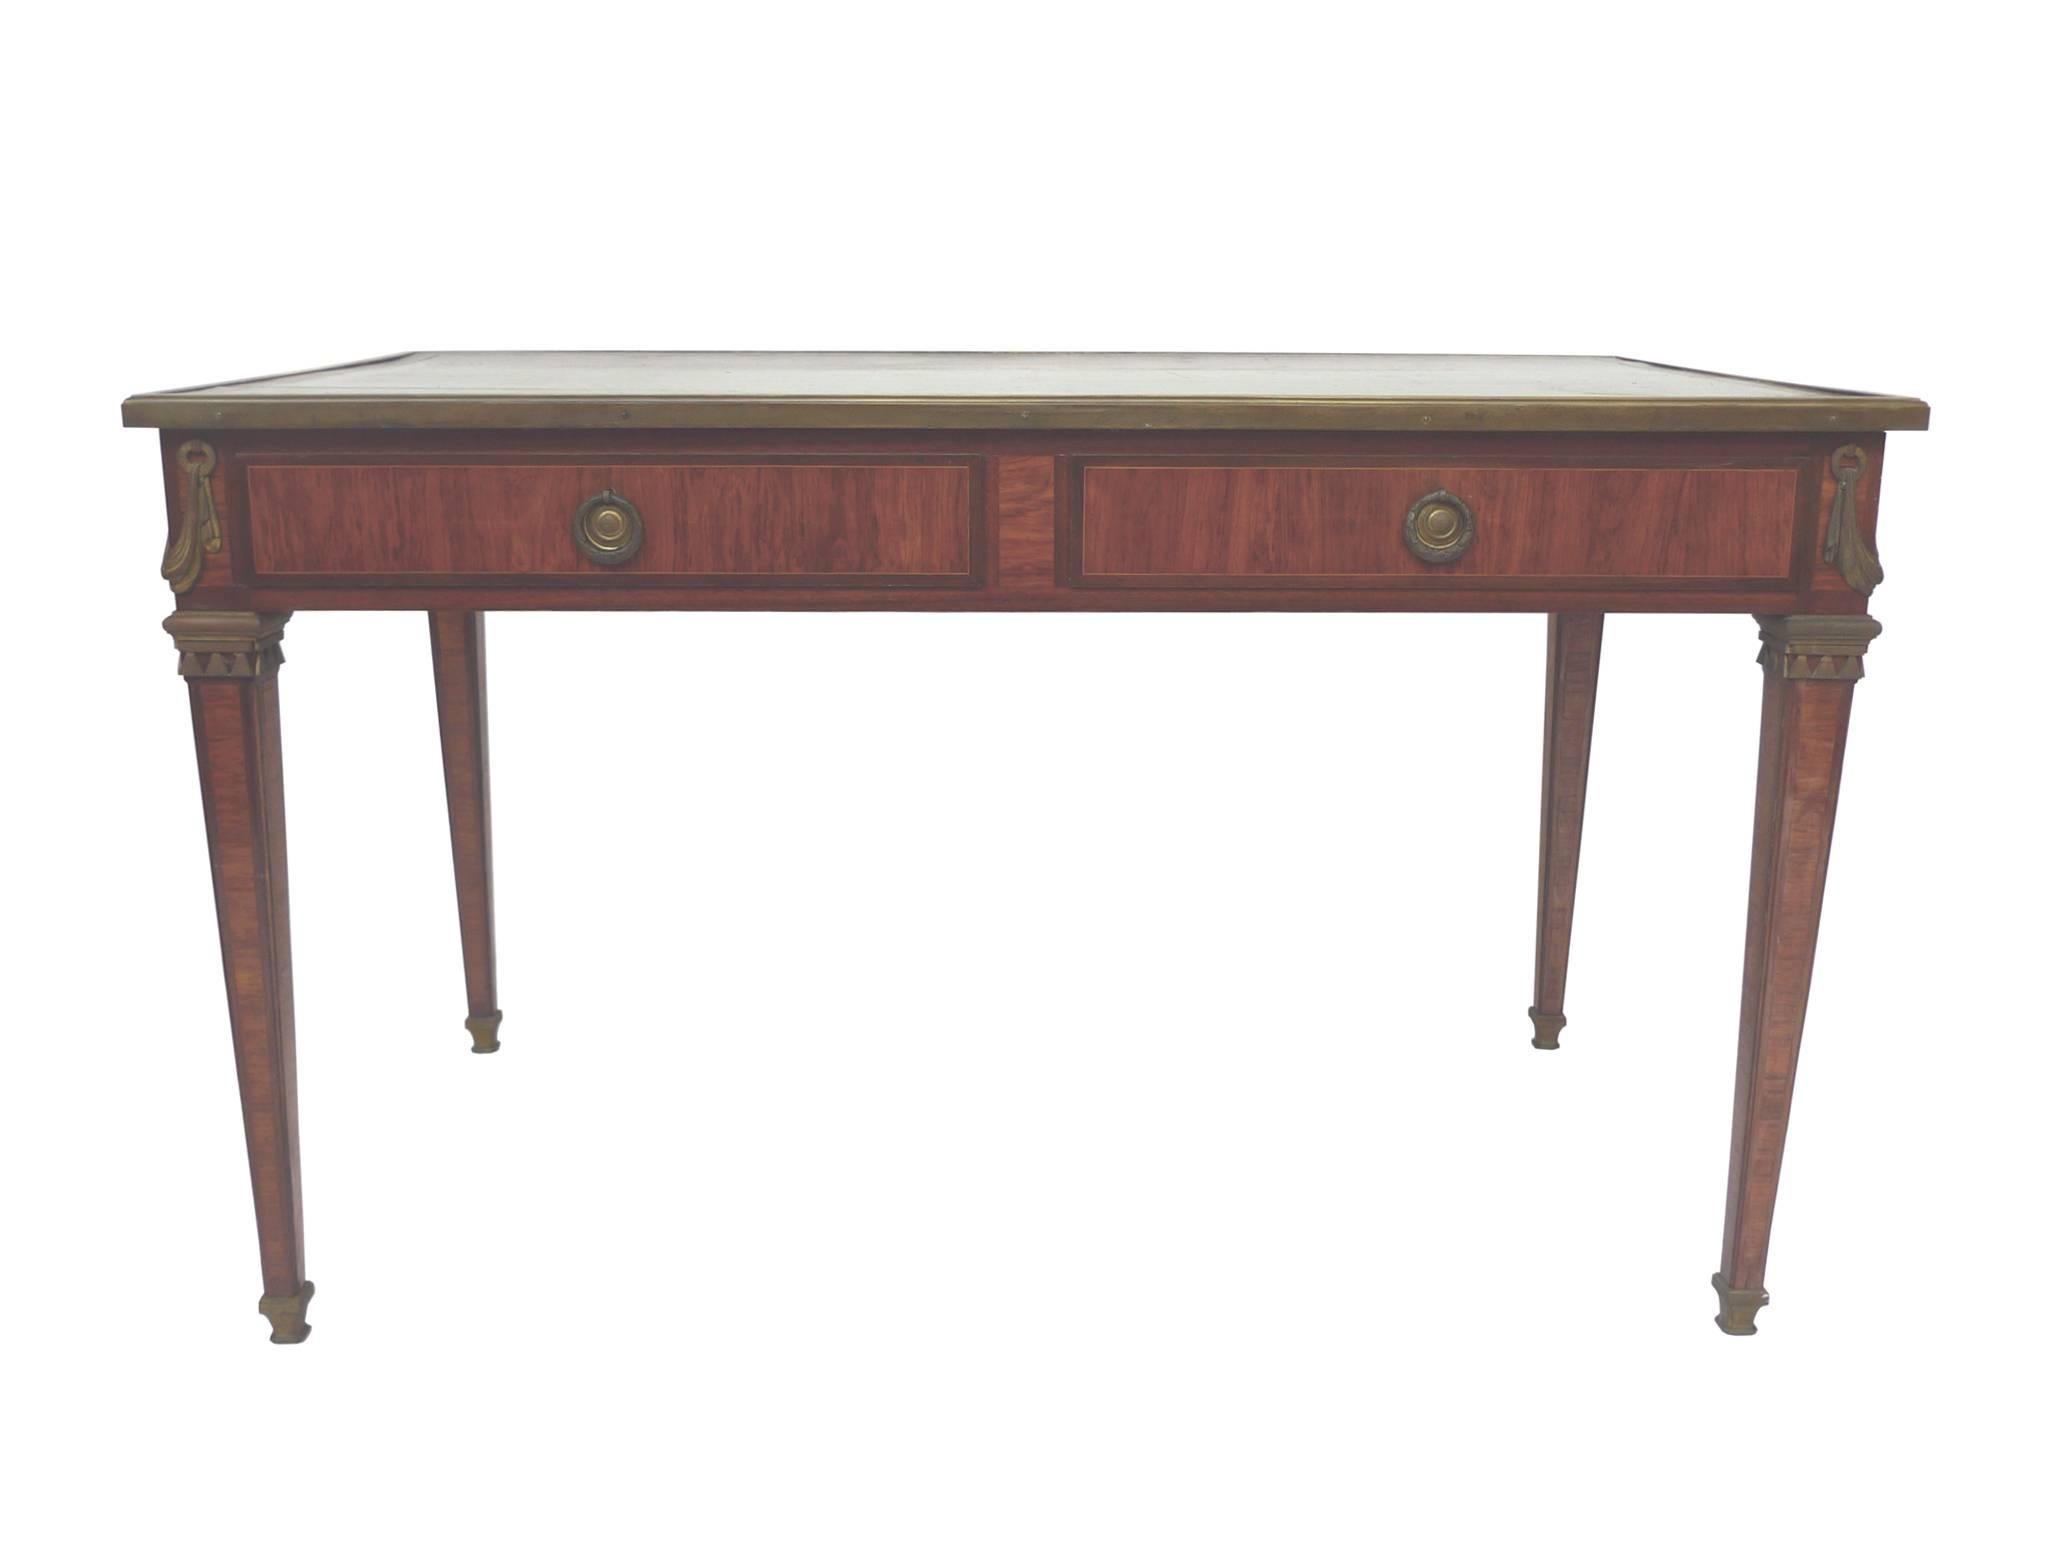 This French late 19th century writing desk is Cuban mahogany veneer. The top is covered in a beautifully aged, red-brown leather with embossed, gilt details and bronze trimming. There are two wide drawers with round pulls. The legs are also adorned